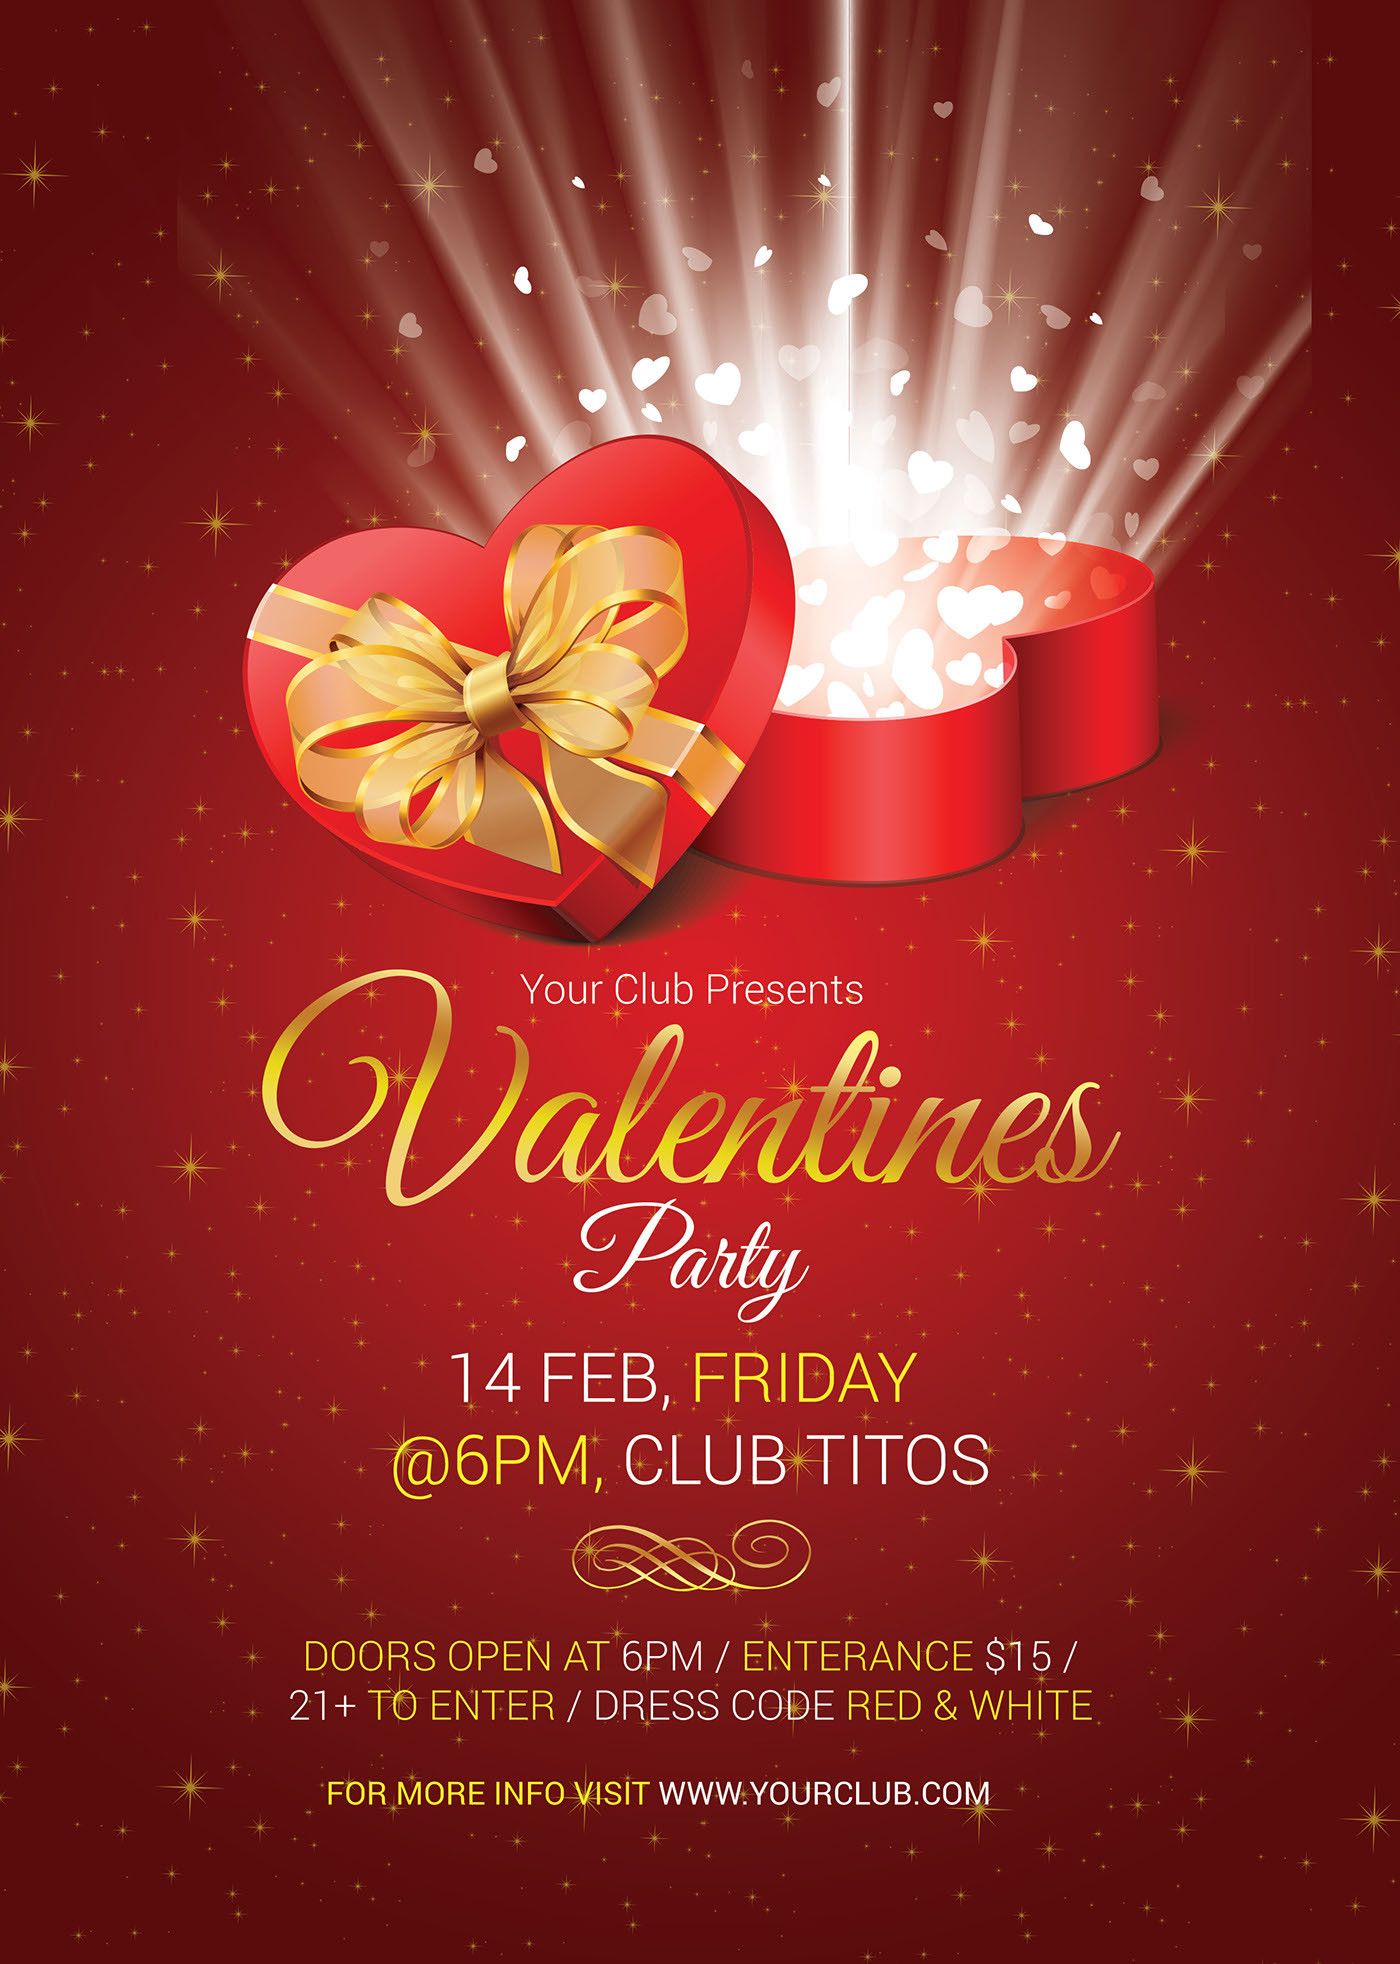 Valentines Day Party Invitations
 Valentines Day Party Invitation Flyer on Behance